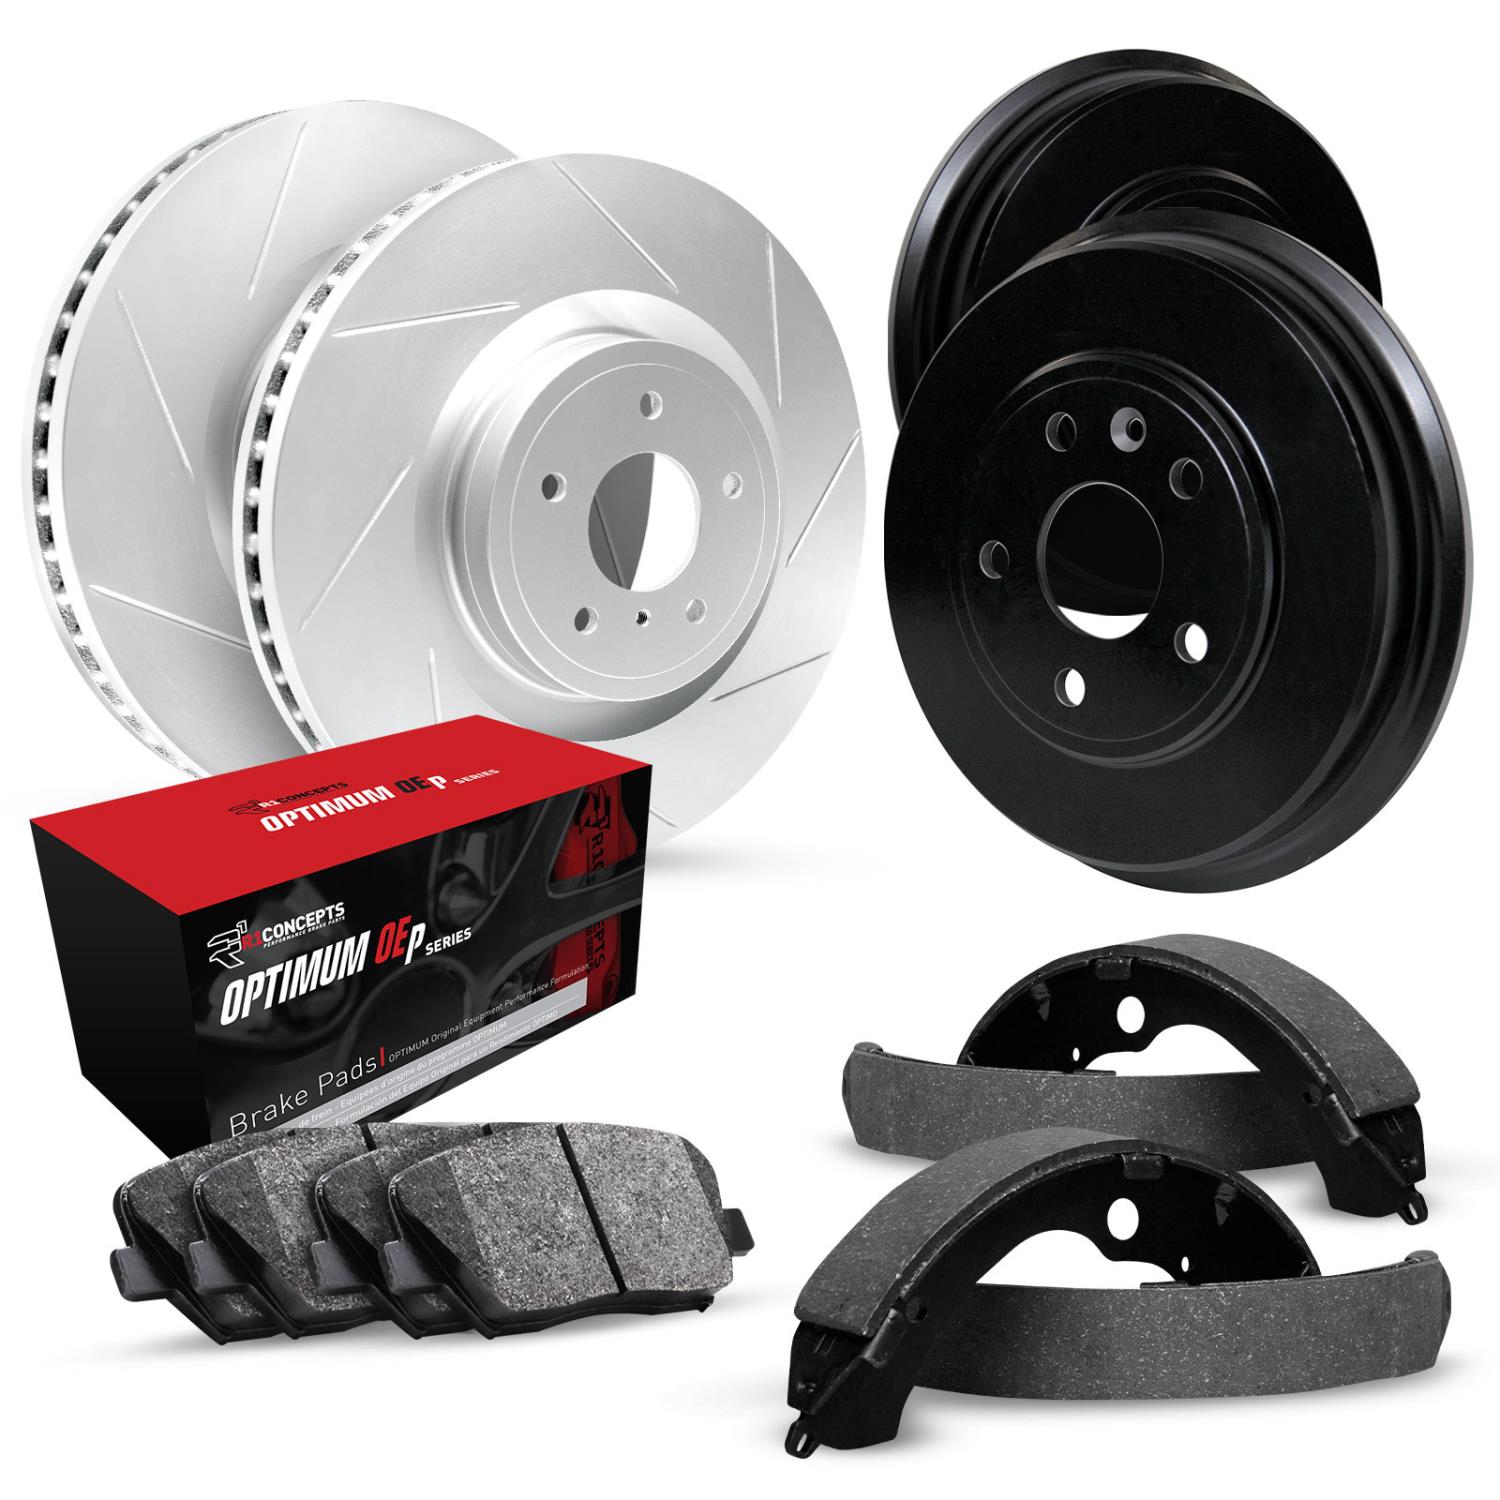 GEO-Carbon Slotted Brake Rotor & Drum Set w/Optimum OE Pads & Shoes, 1973-1975 GM, Position: Front & Rear